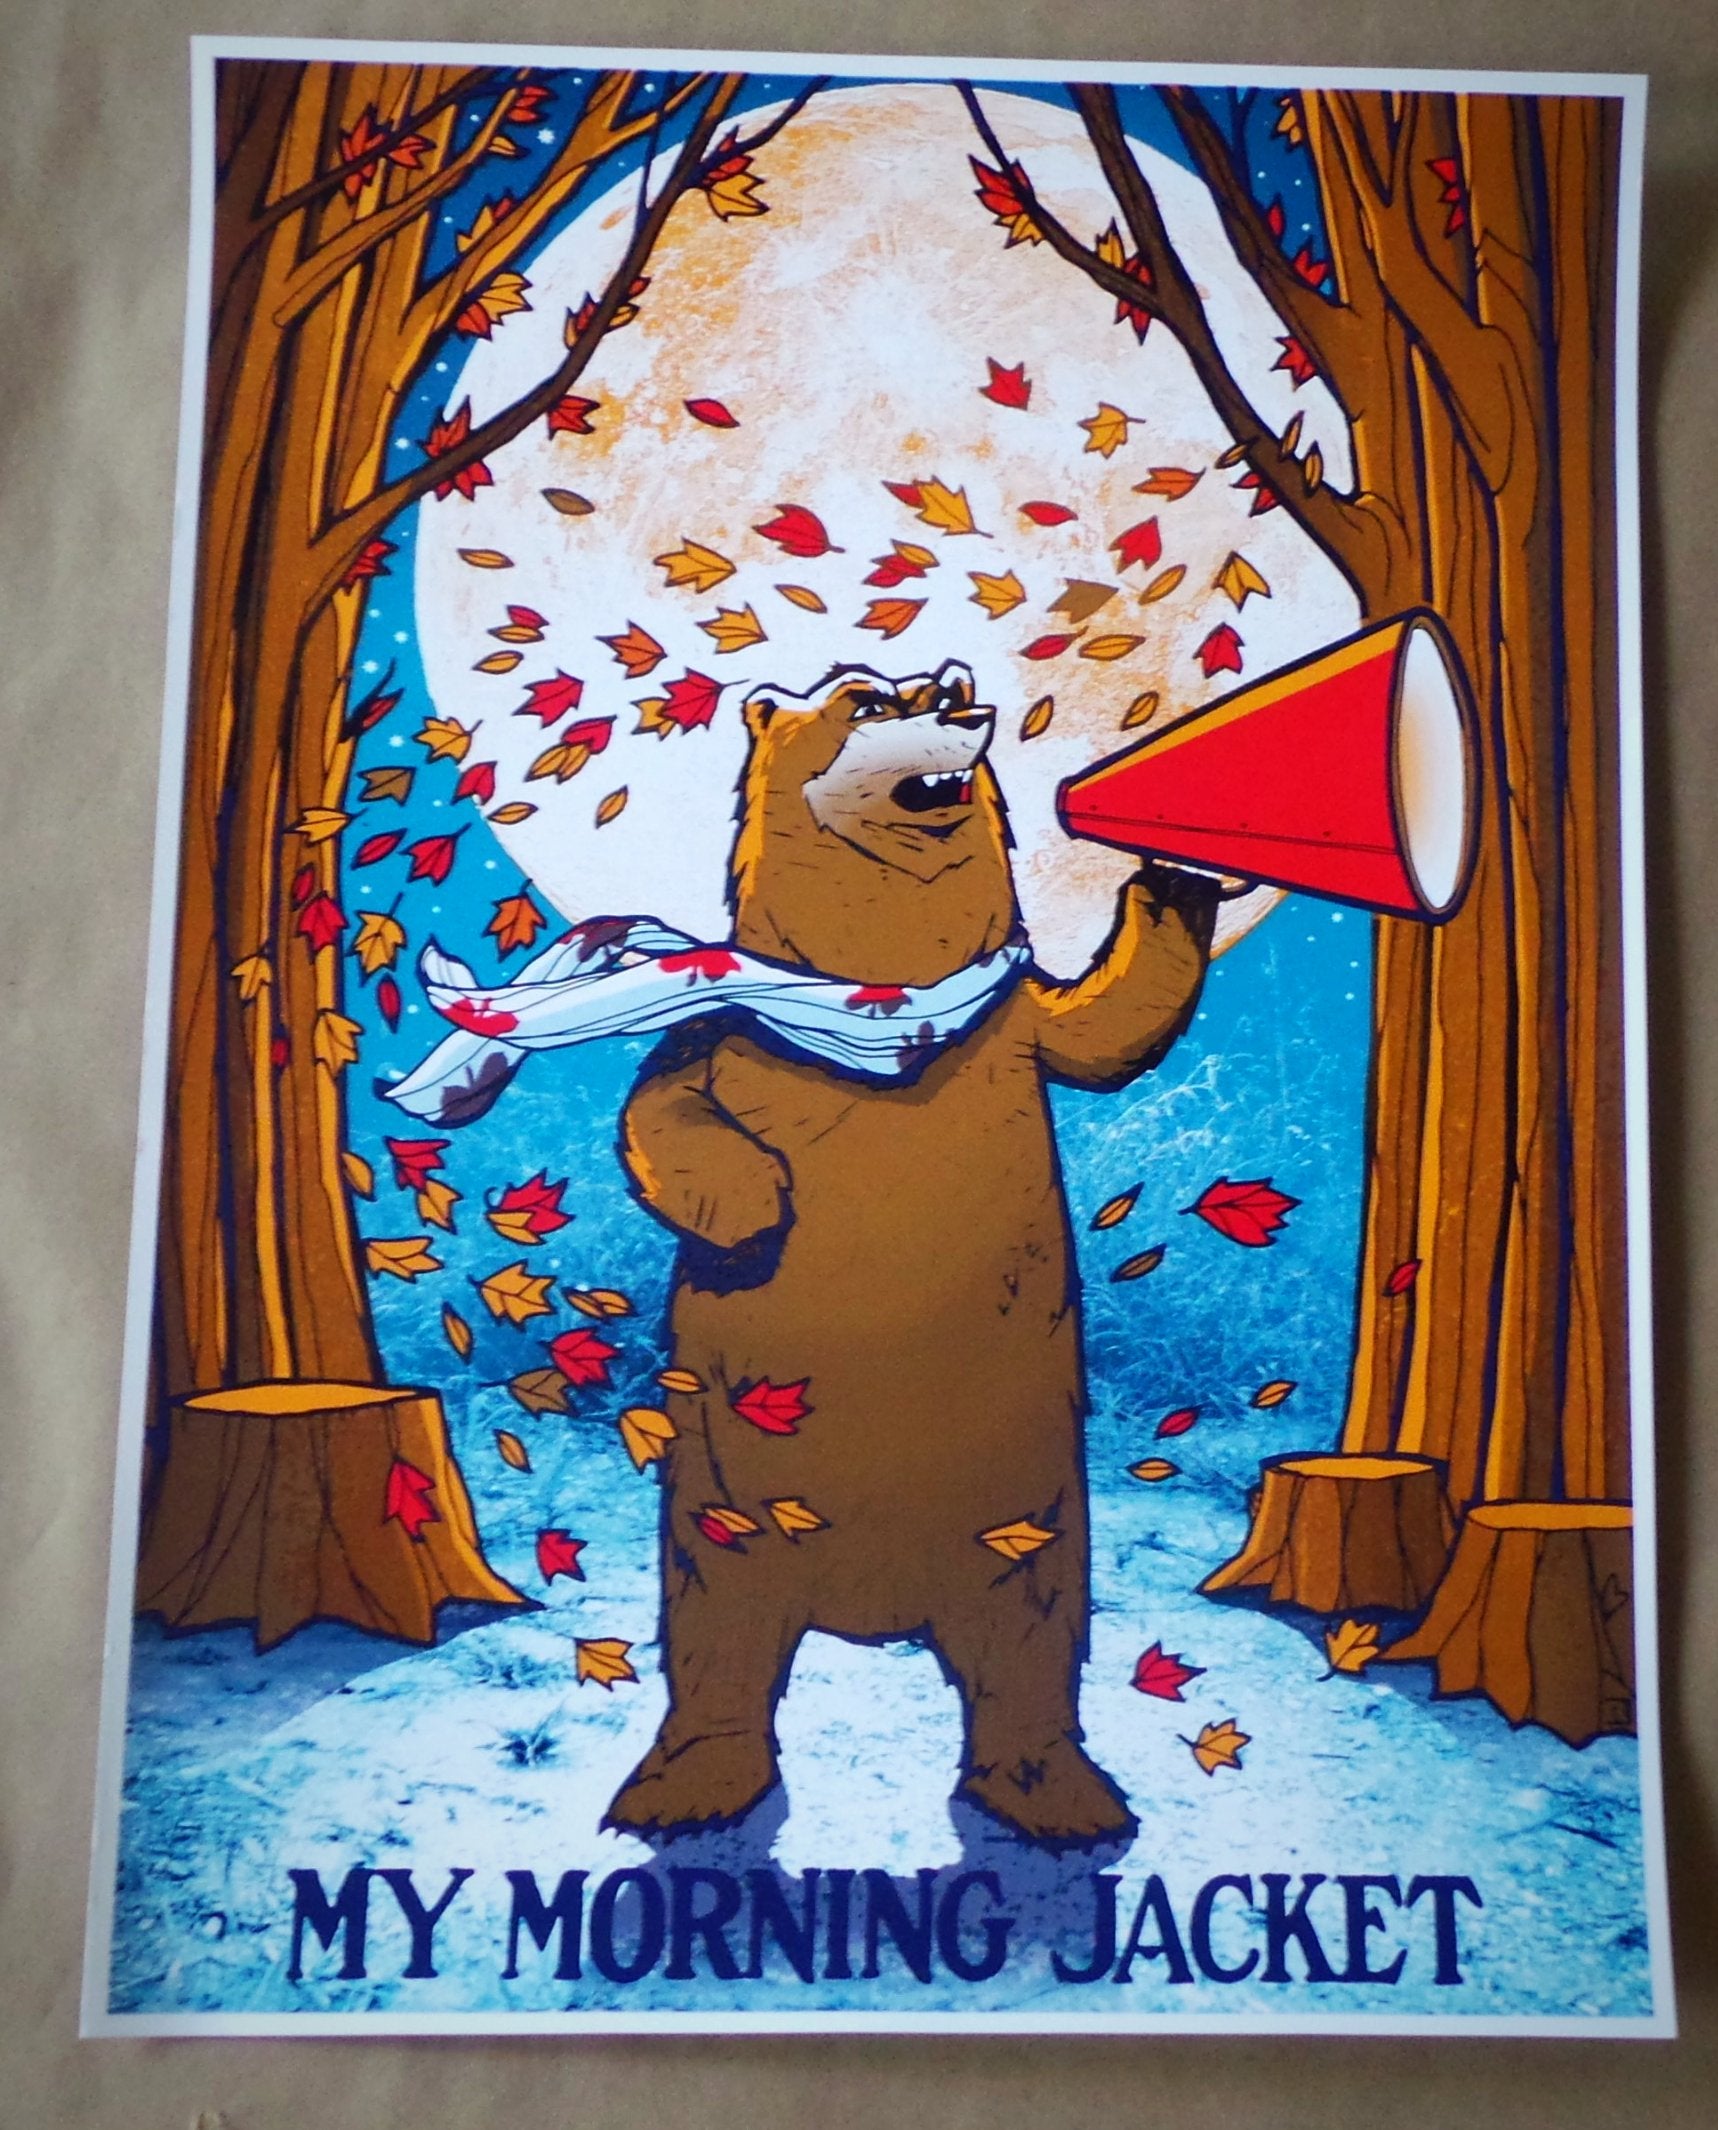 Title: My Morning Jacket Roll Call (2011)  Type: Screen print on thick French paper.  Size: 18" x 24"  Notes:  Check out our other listings for more hard-to-find and out-of-print posters.  Check out our other listings for more hard-to-find and out-of-print posters